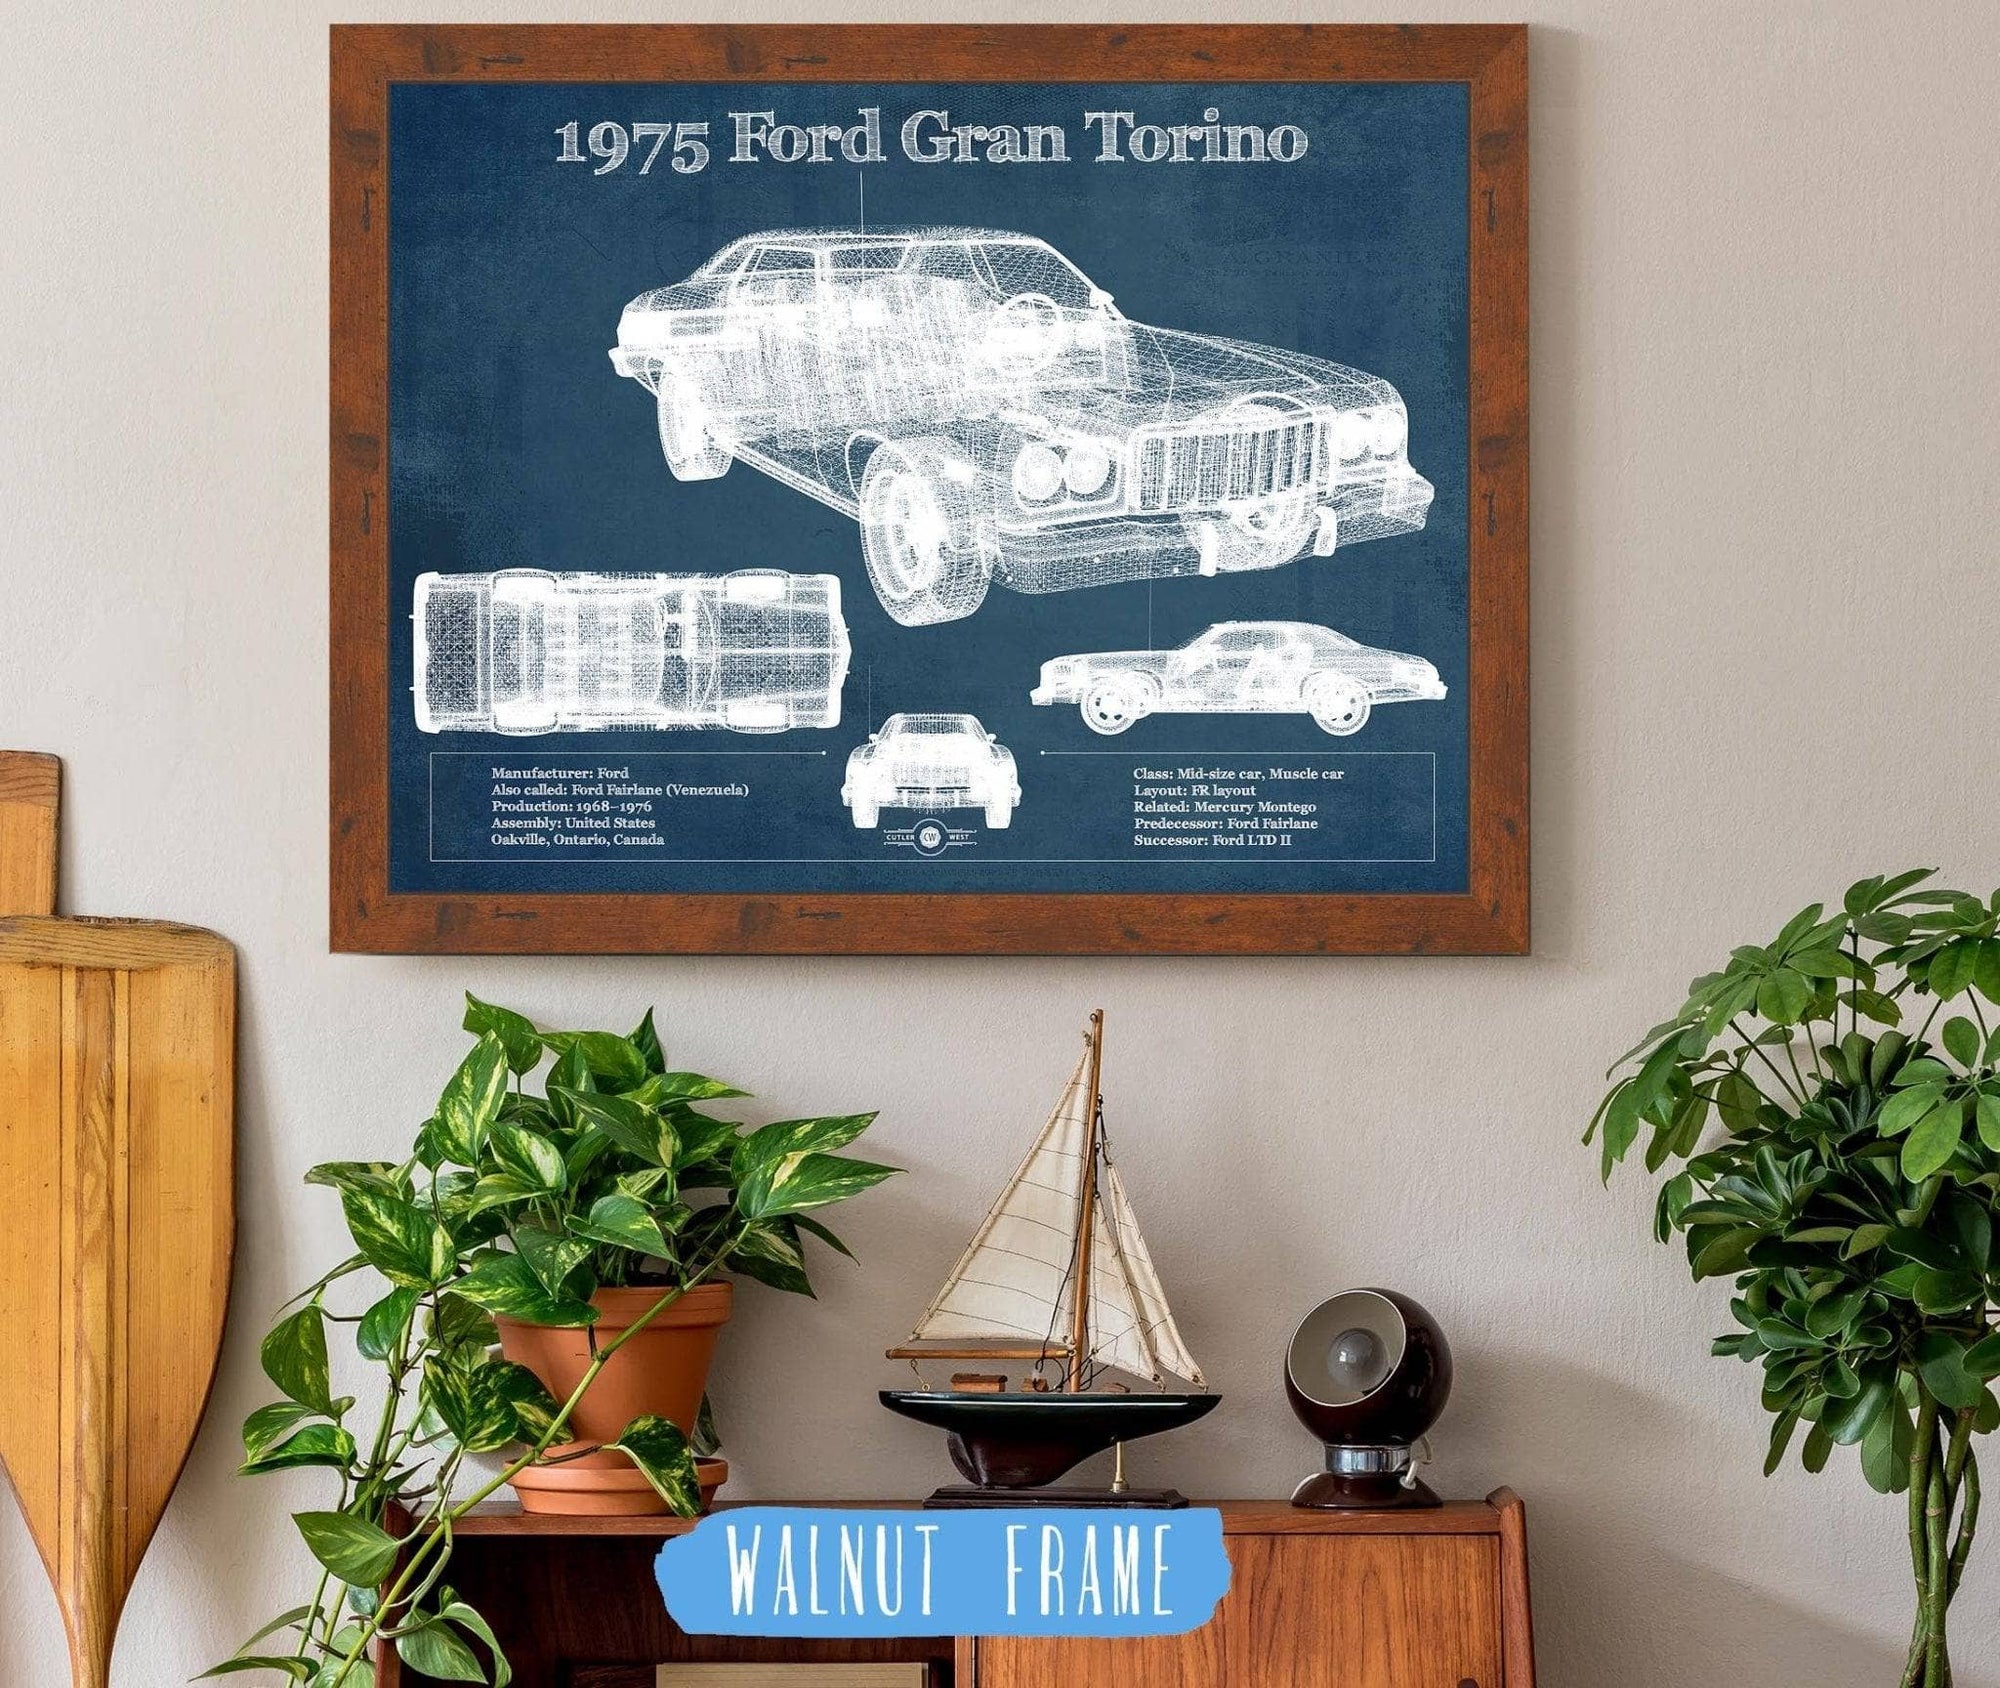 Cutler West Ford Collection 14" x 11" / Walnut Frame Ford Gran Torino 1975 Blueprint Vintage Auto Print 933350038_41546